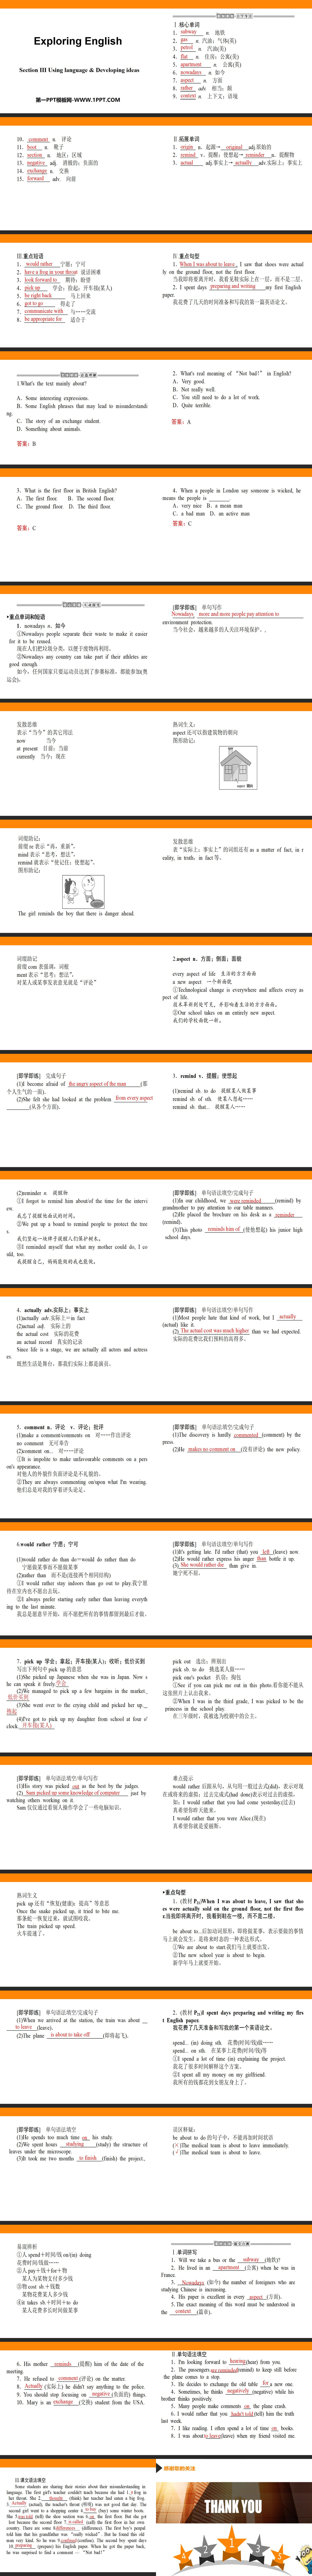 《Exploring English》Section ⅢPPT
（2）